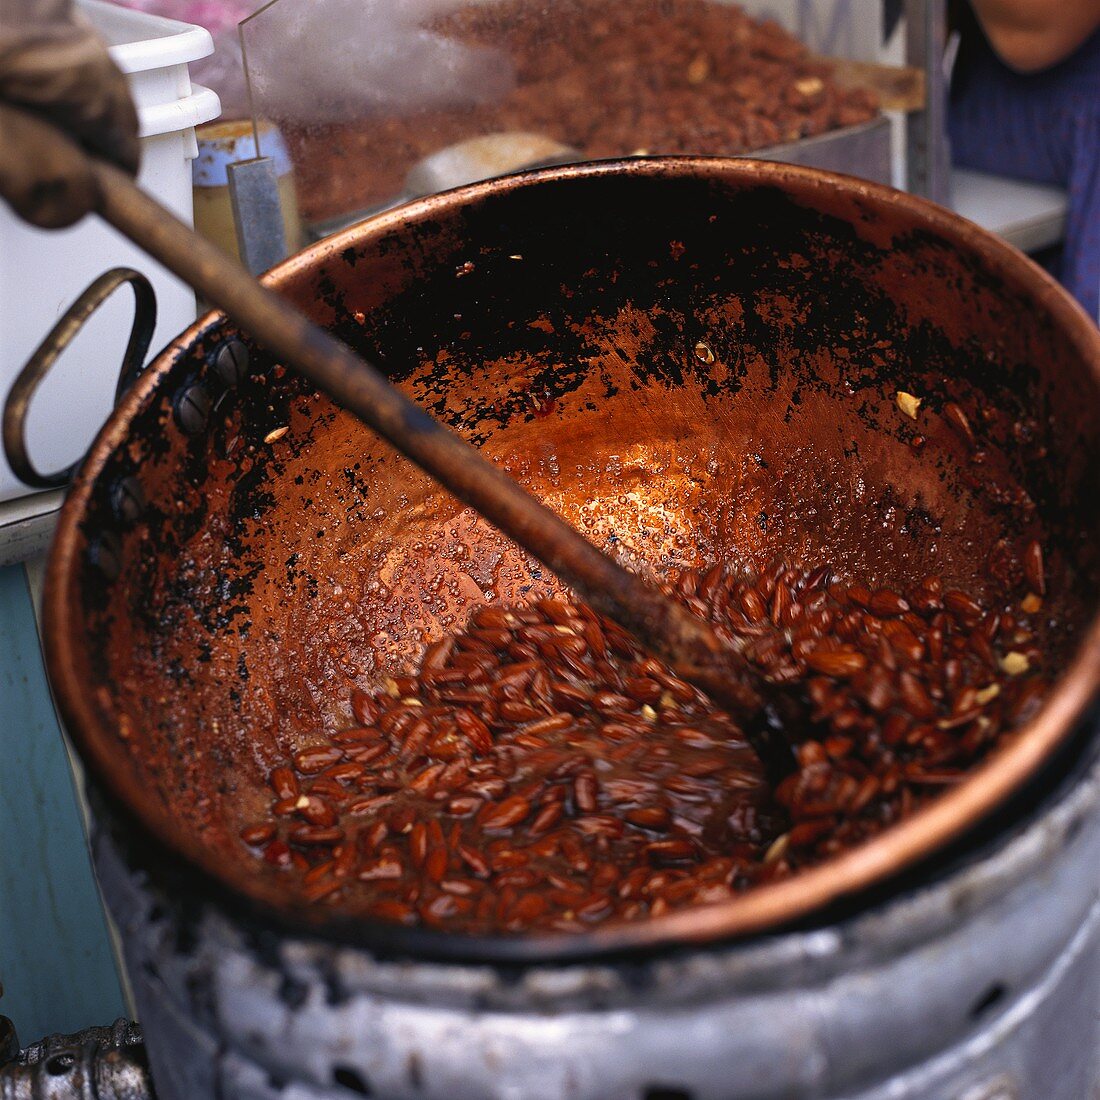 Roasting almonds at market stall